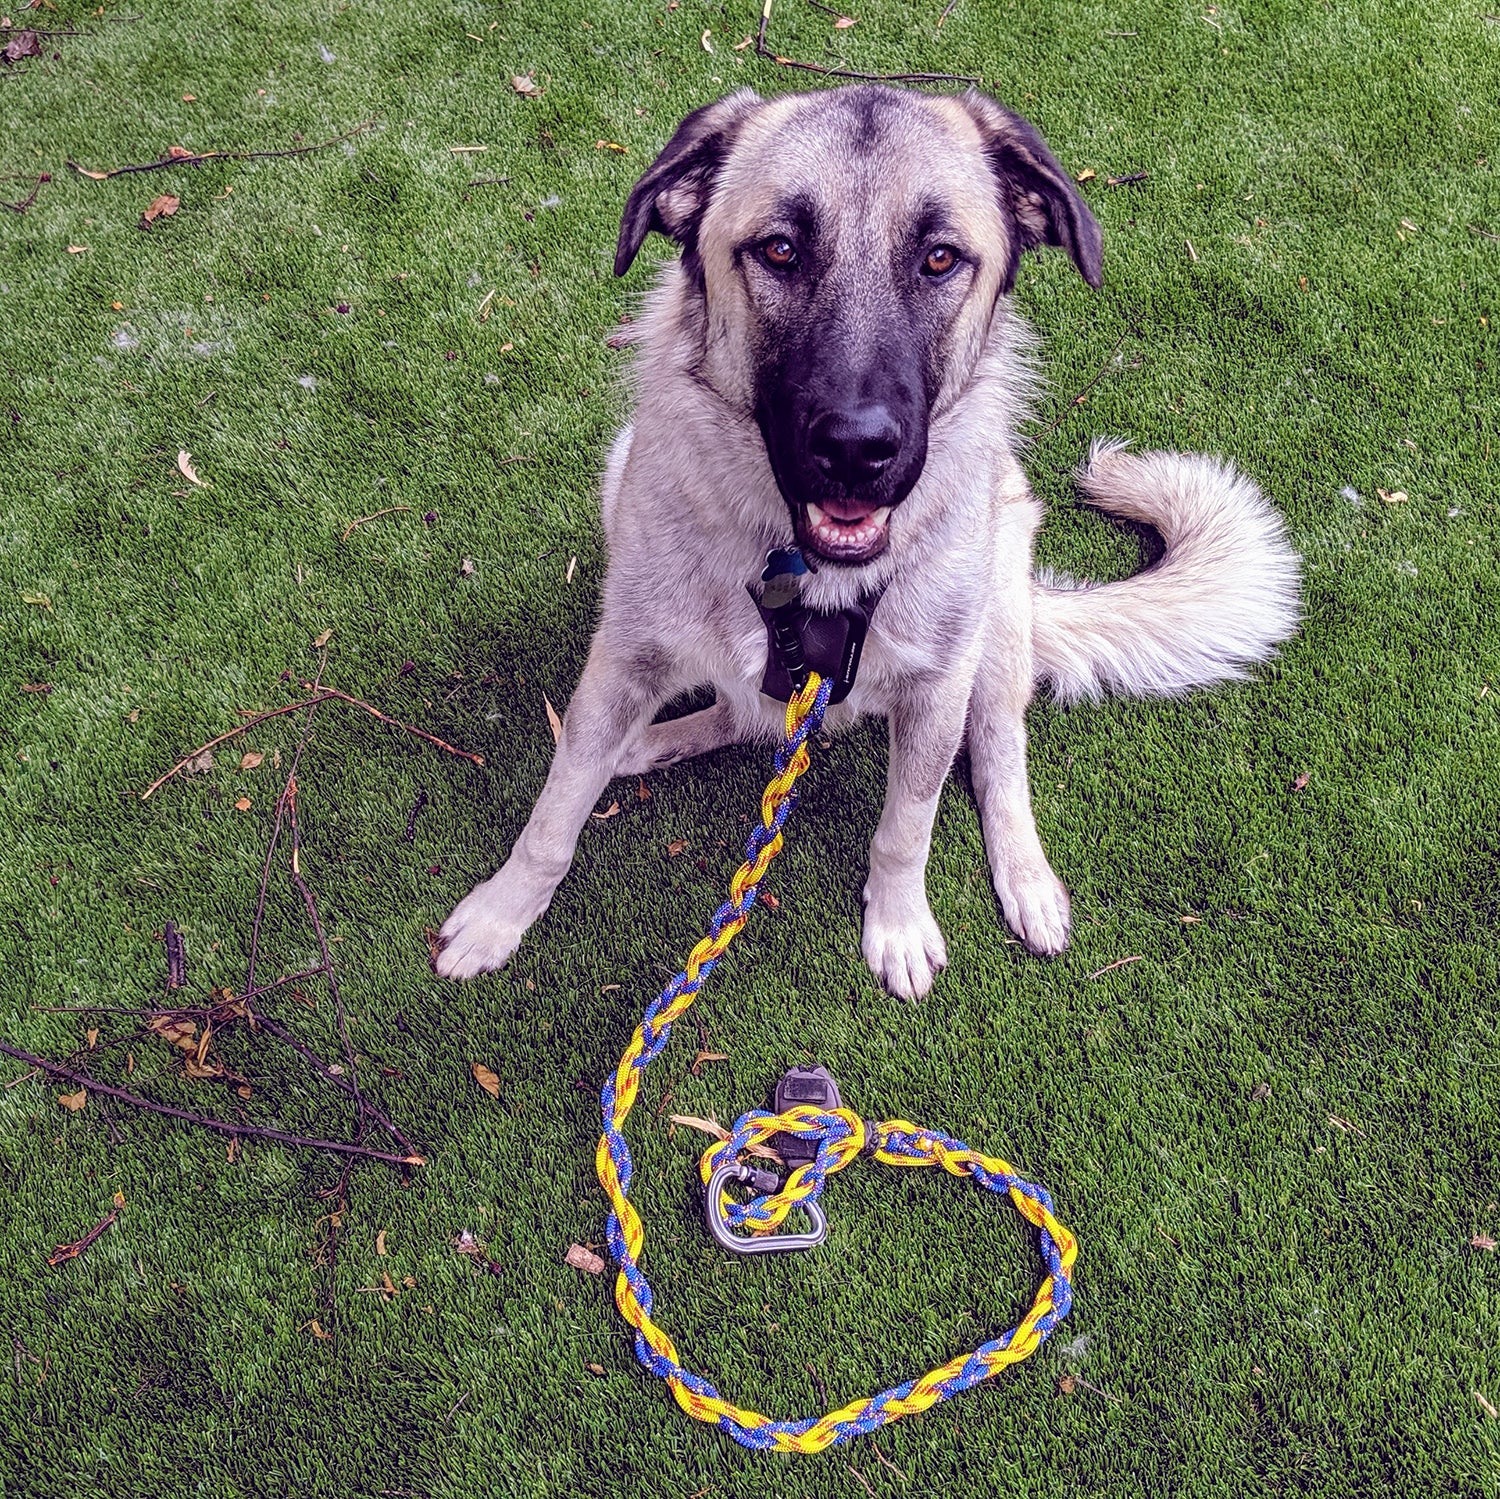 How to Make Your Own Dog Leash Outside Online